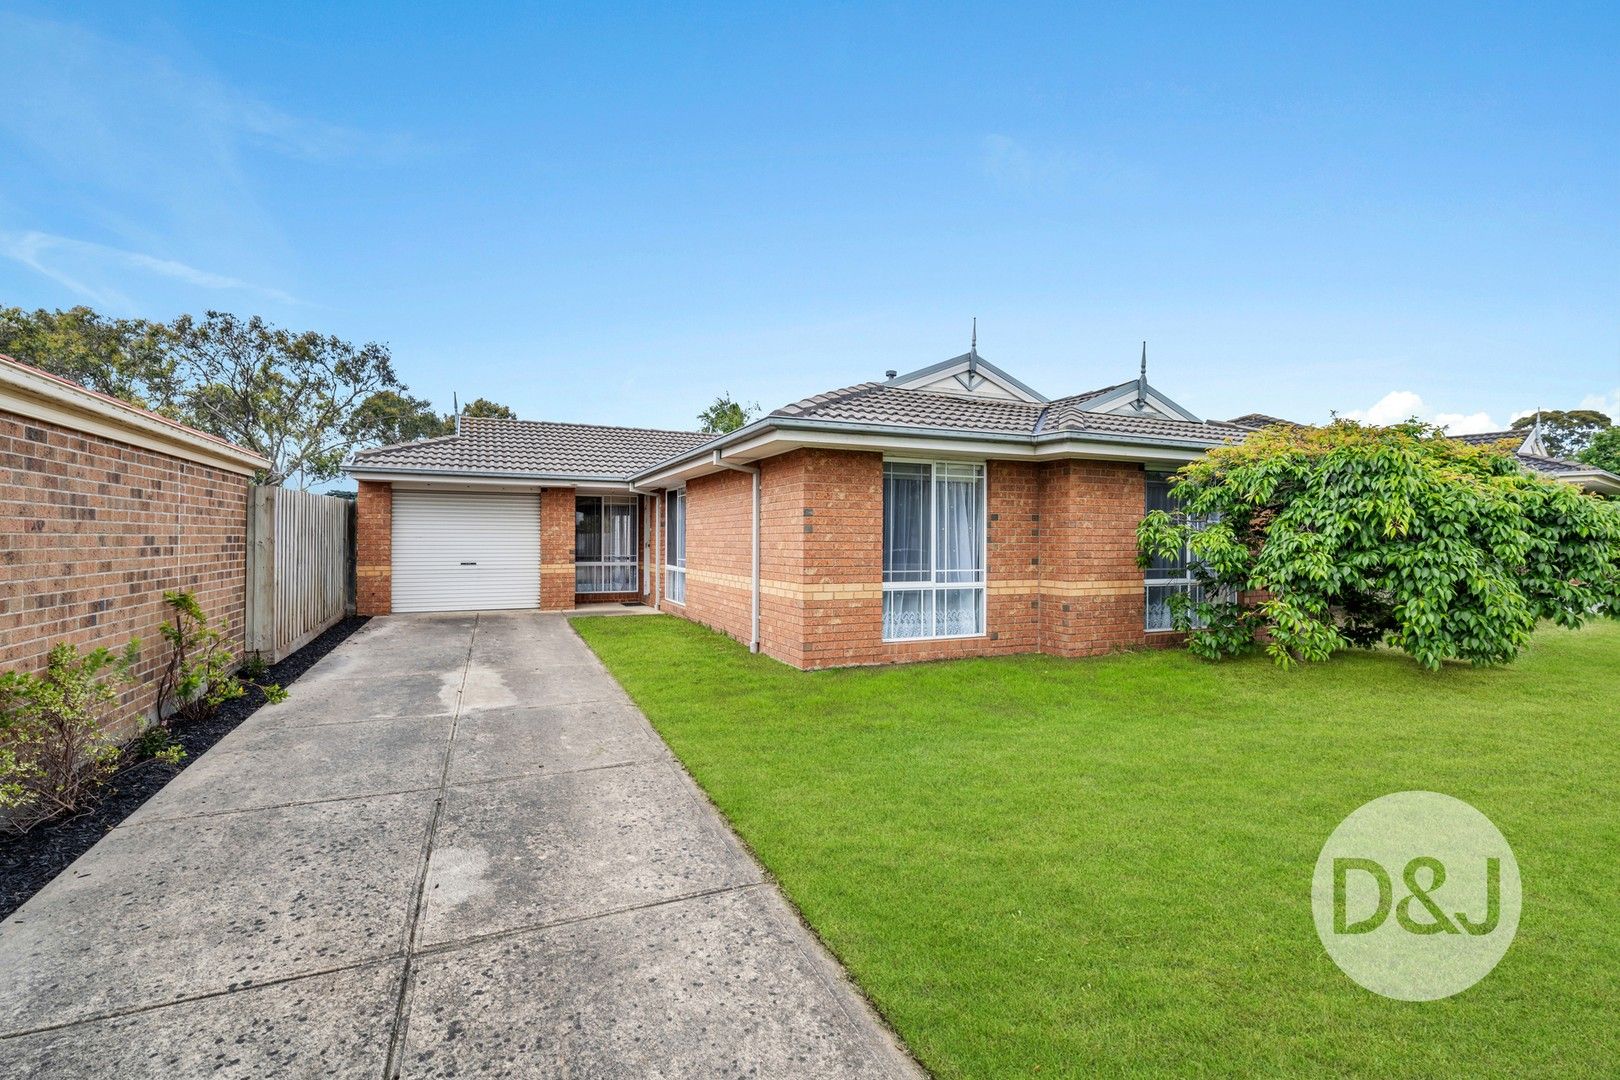 3 bedrooms House in 24 Kinlora Dr SOMERVILLE VIC, 3912